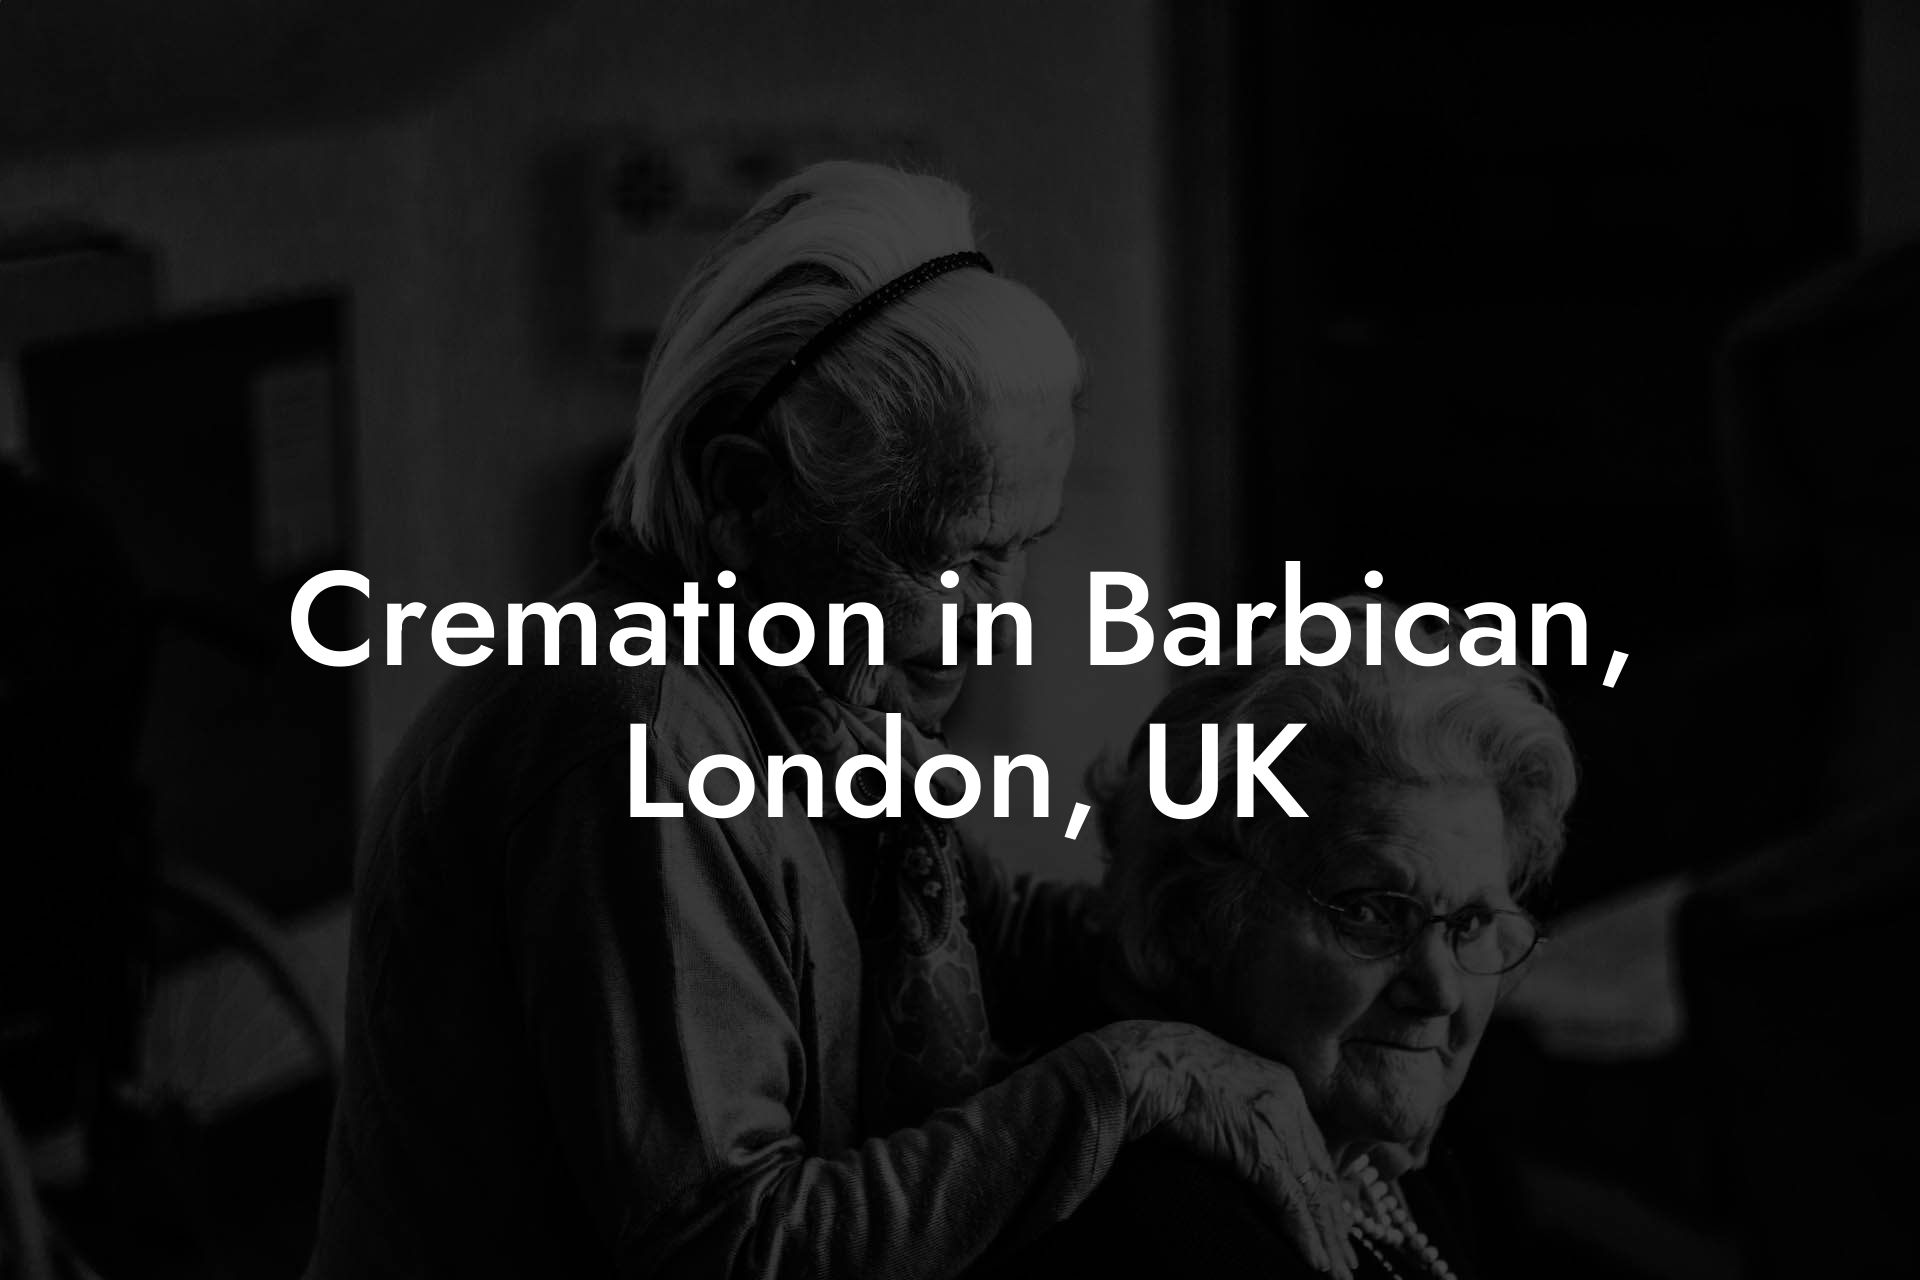 Cremation in Barbican, London, UK